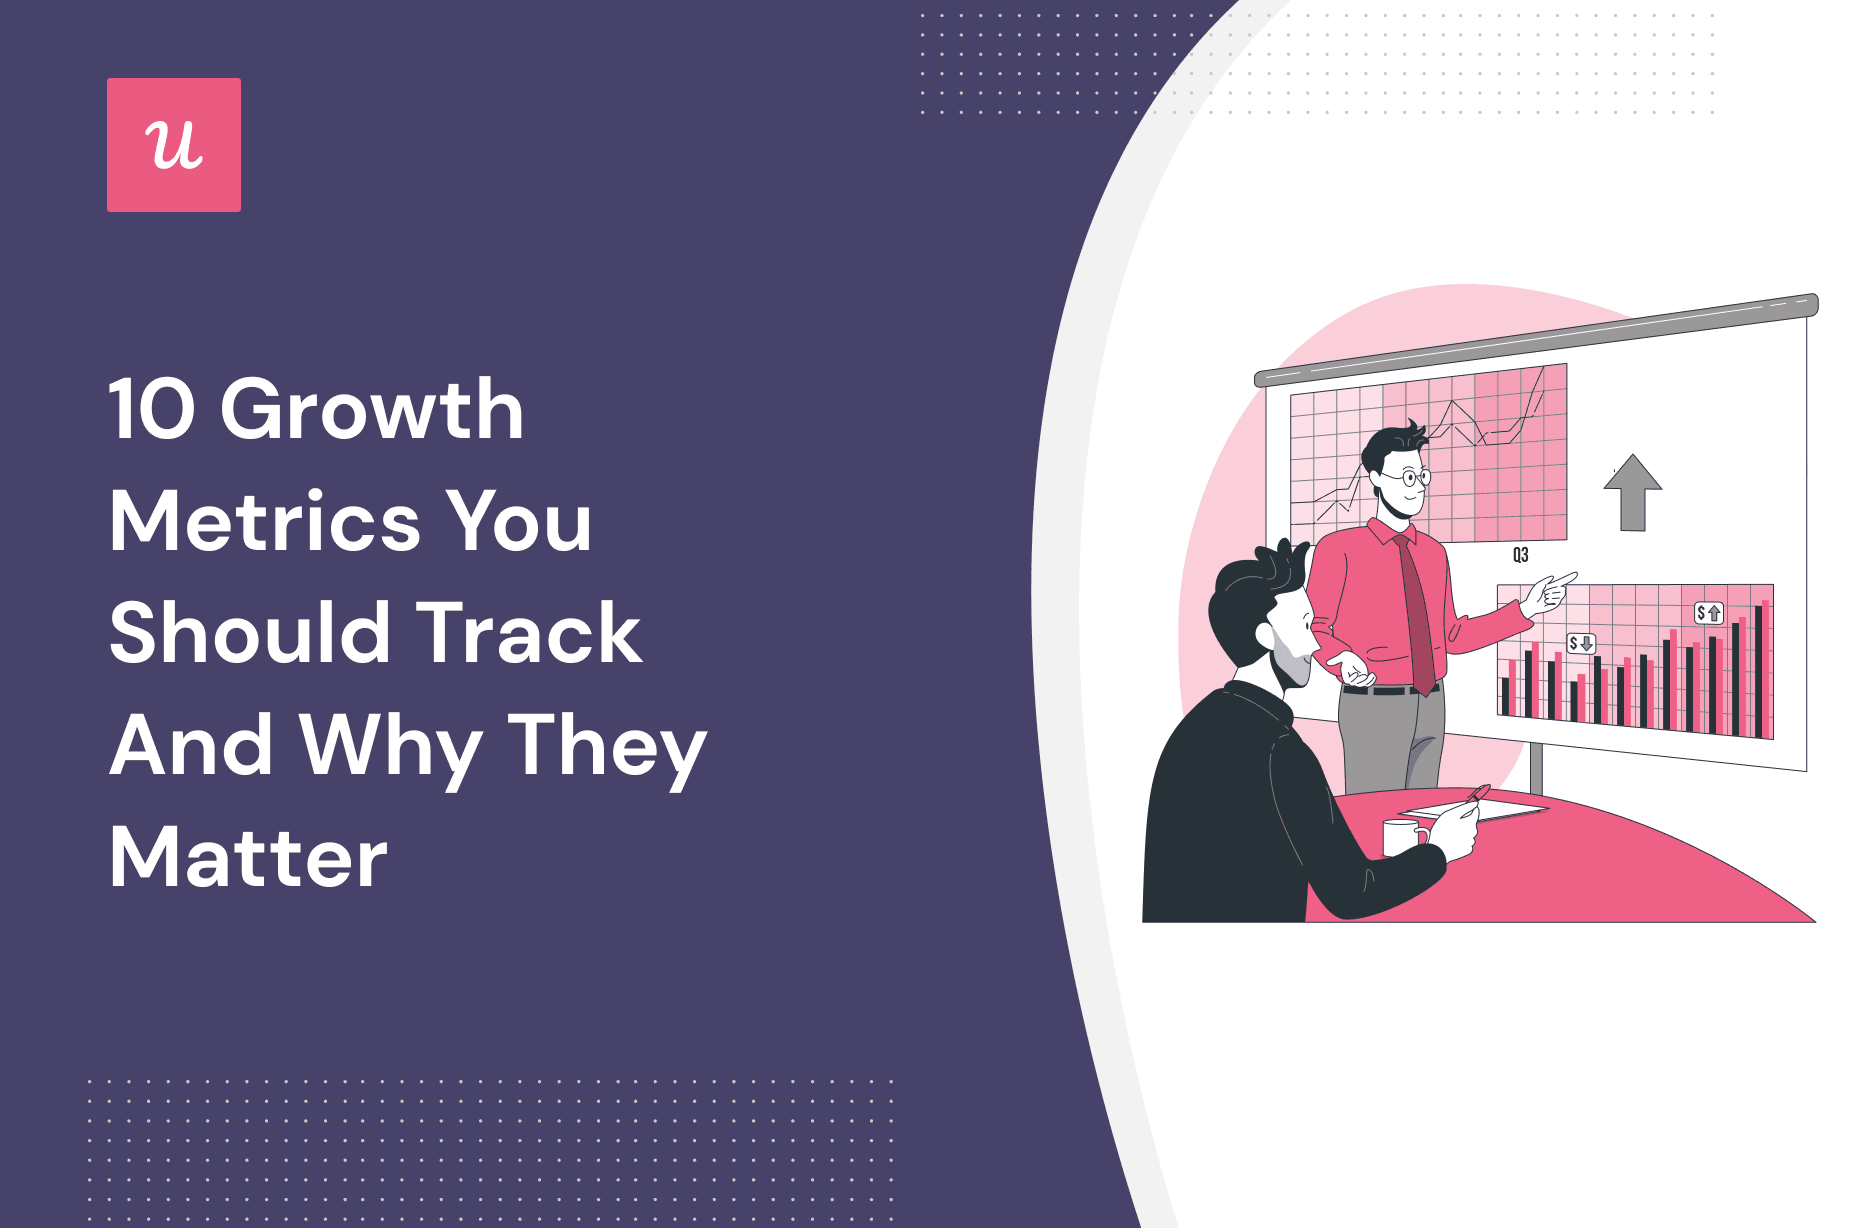 10 Growth Metrics You Should Track And Why They Matter cover